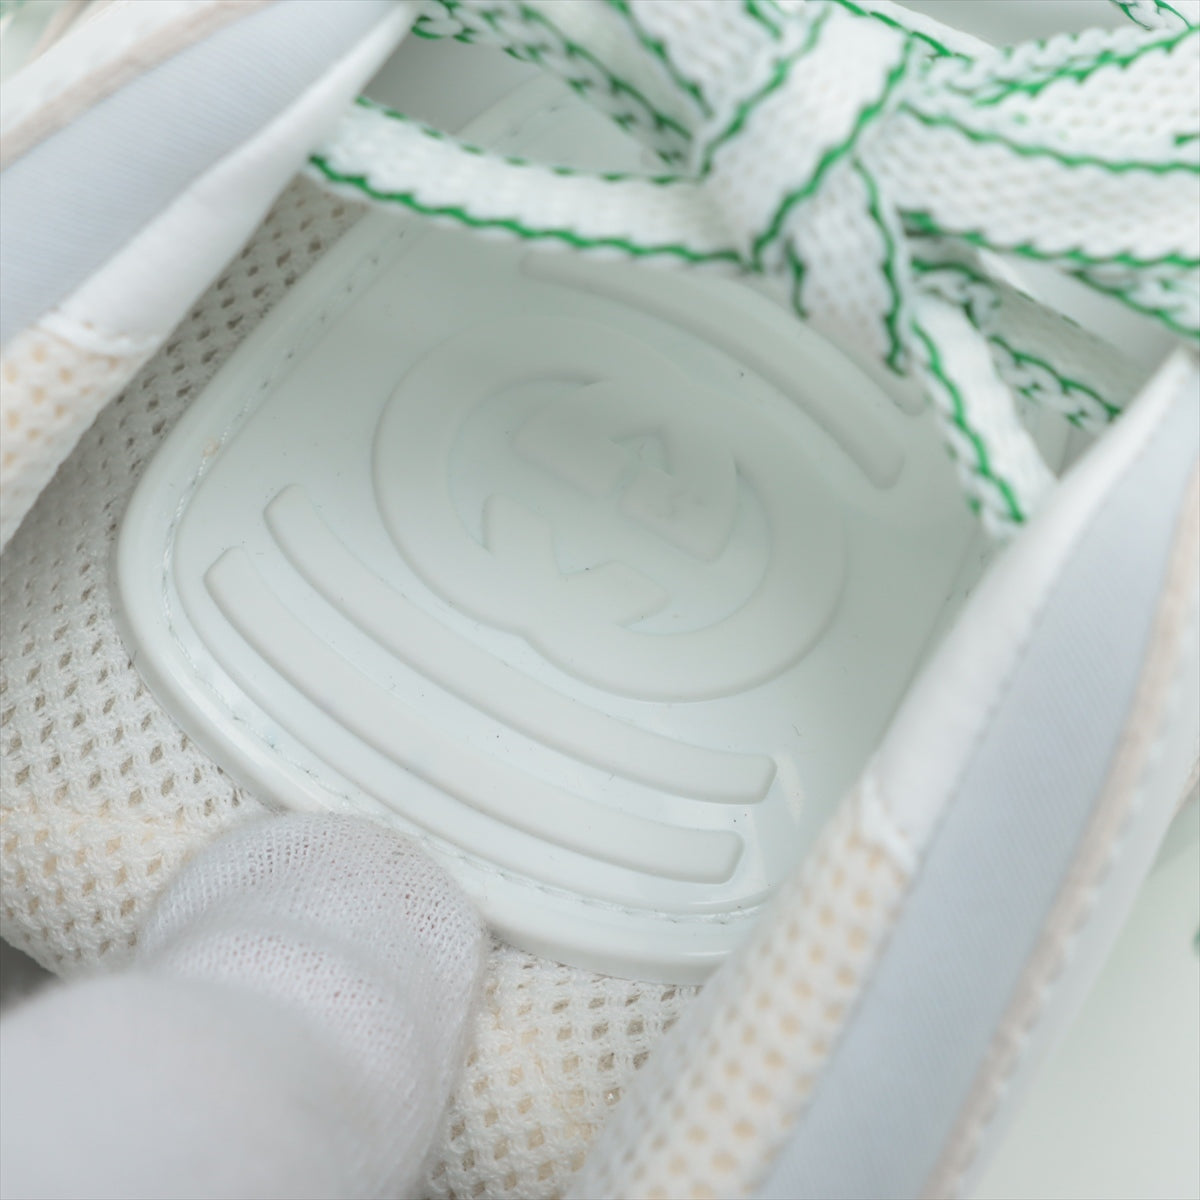 Gucci Basket PVC Leather Trainers 7.5 Men White× Green GG Supreme Rement Rope Box  Bag